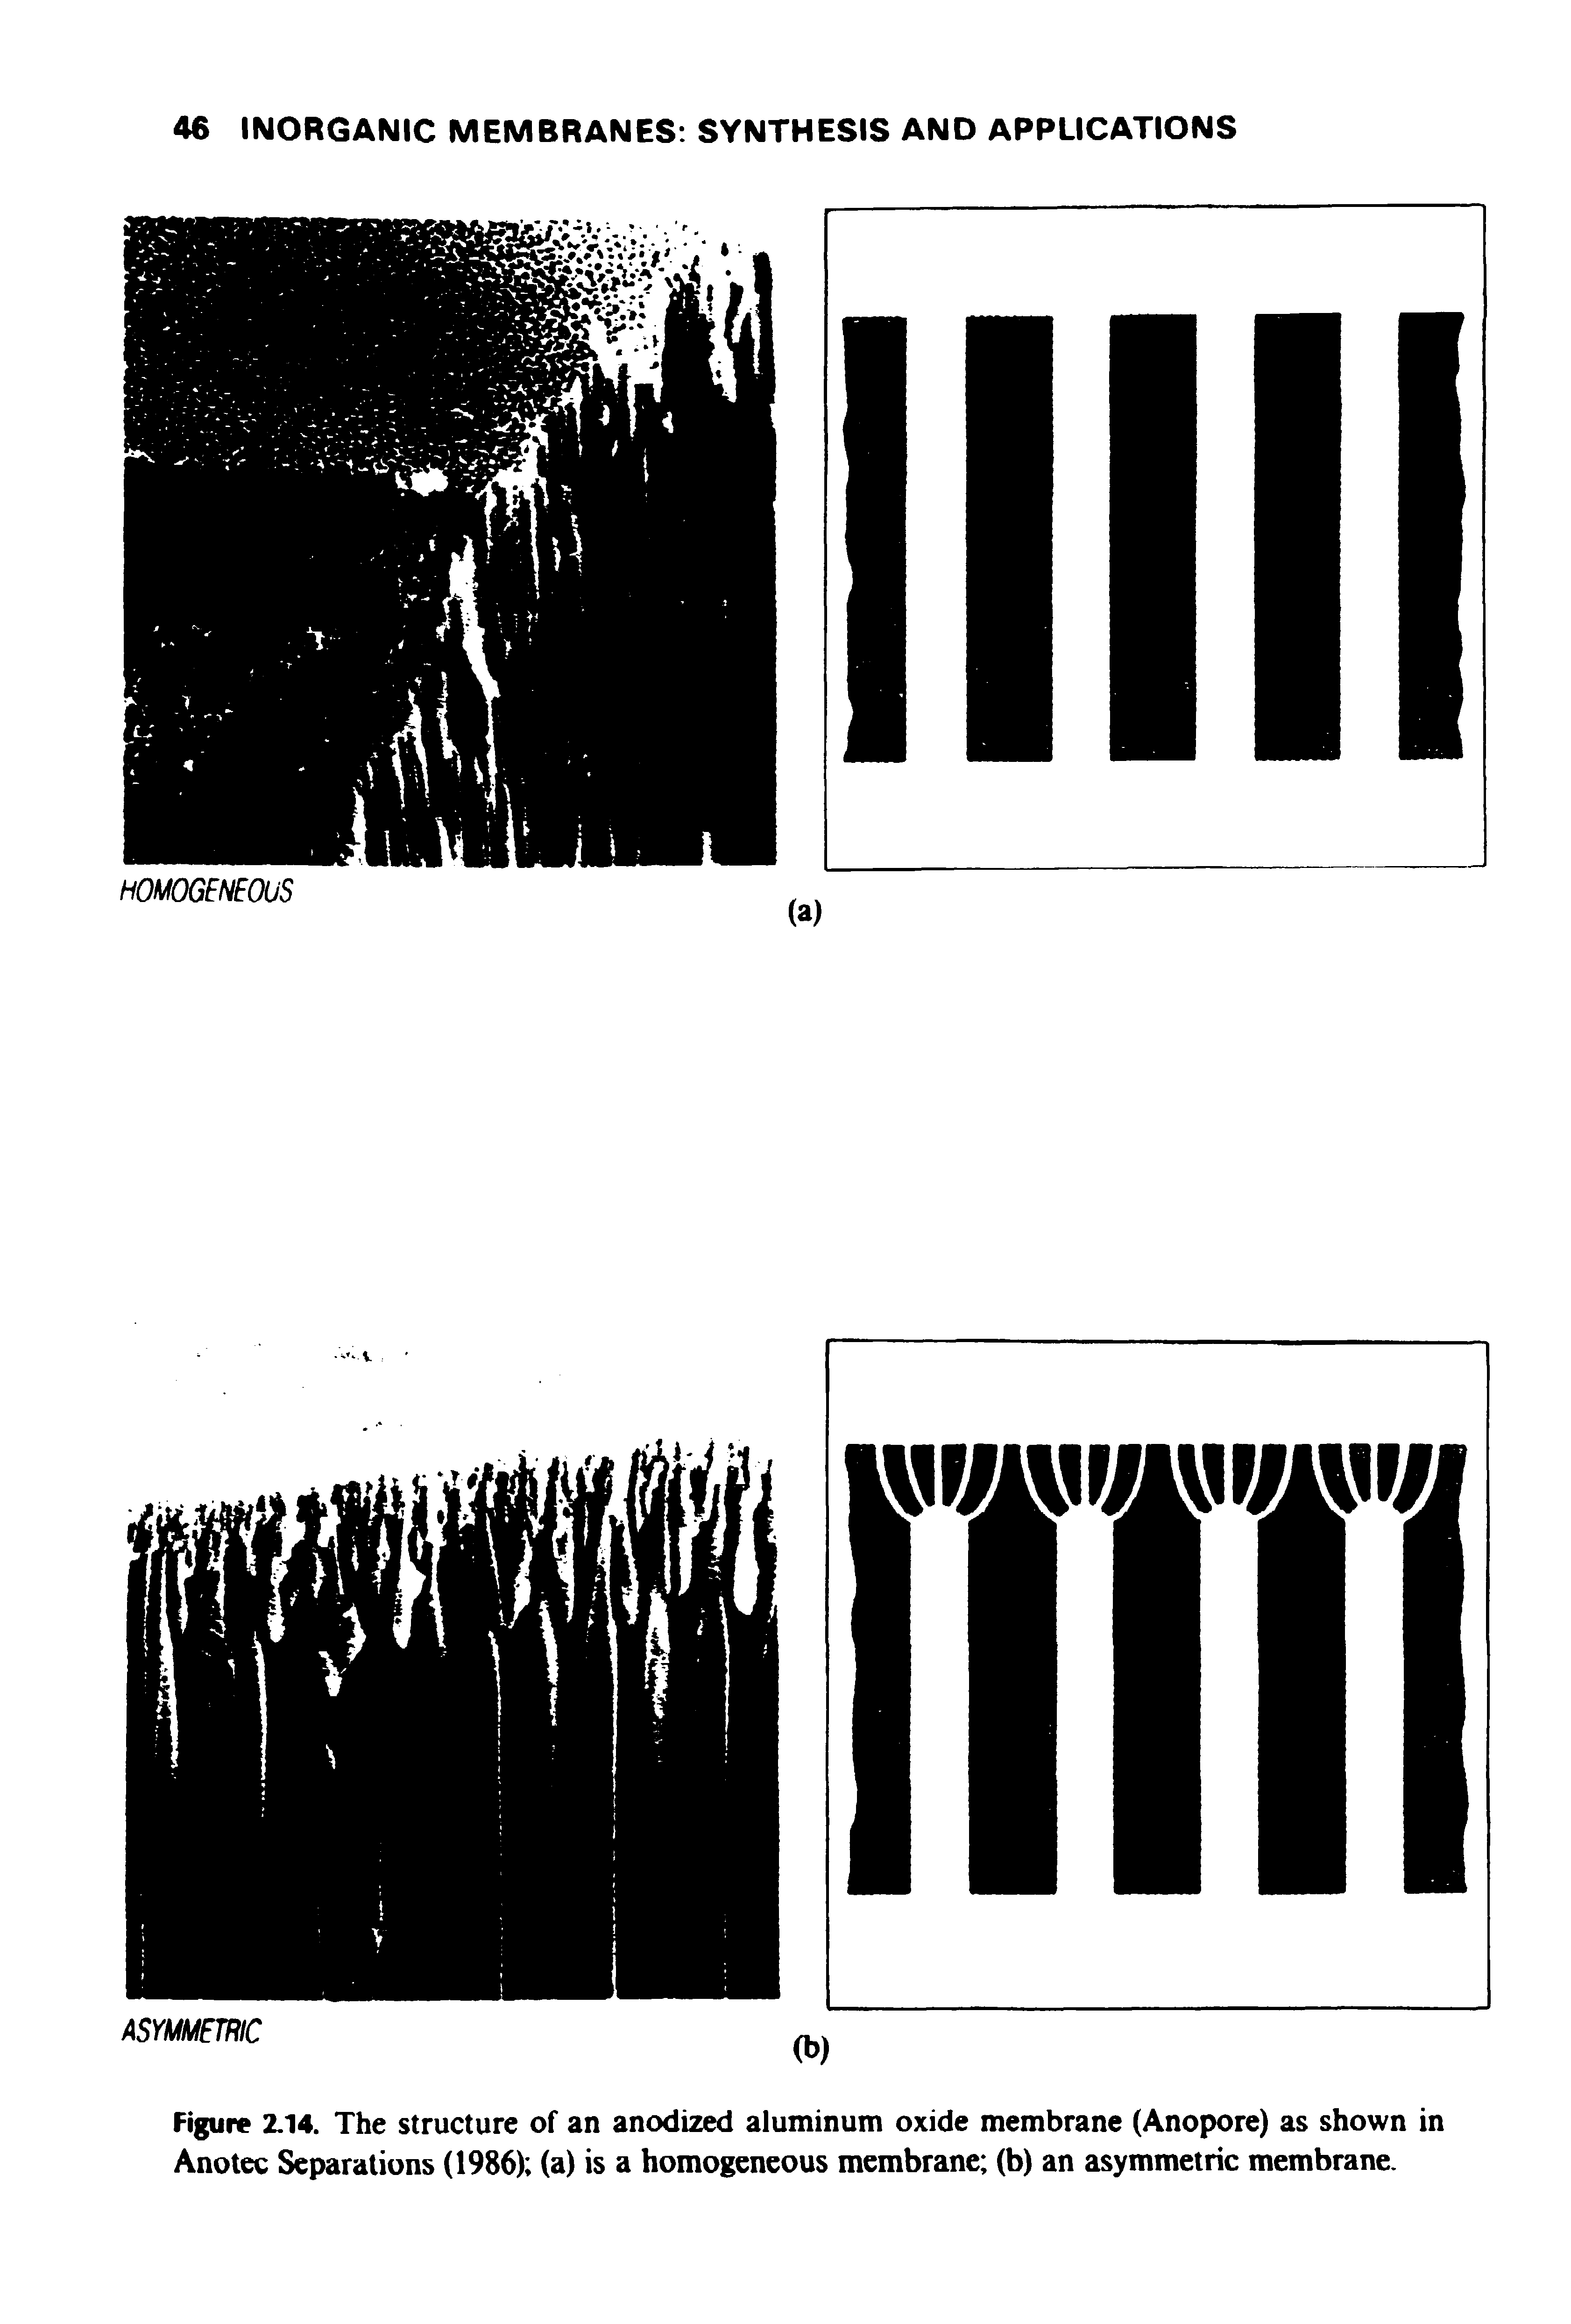 Figure 2.14. The structure of an anodized aluminum oxide membrane (Anopore) as shown in Anotec Separations (1986) (a) is a homogeneous membrane (b) an asymmetric membrane.